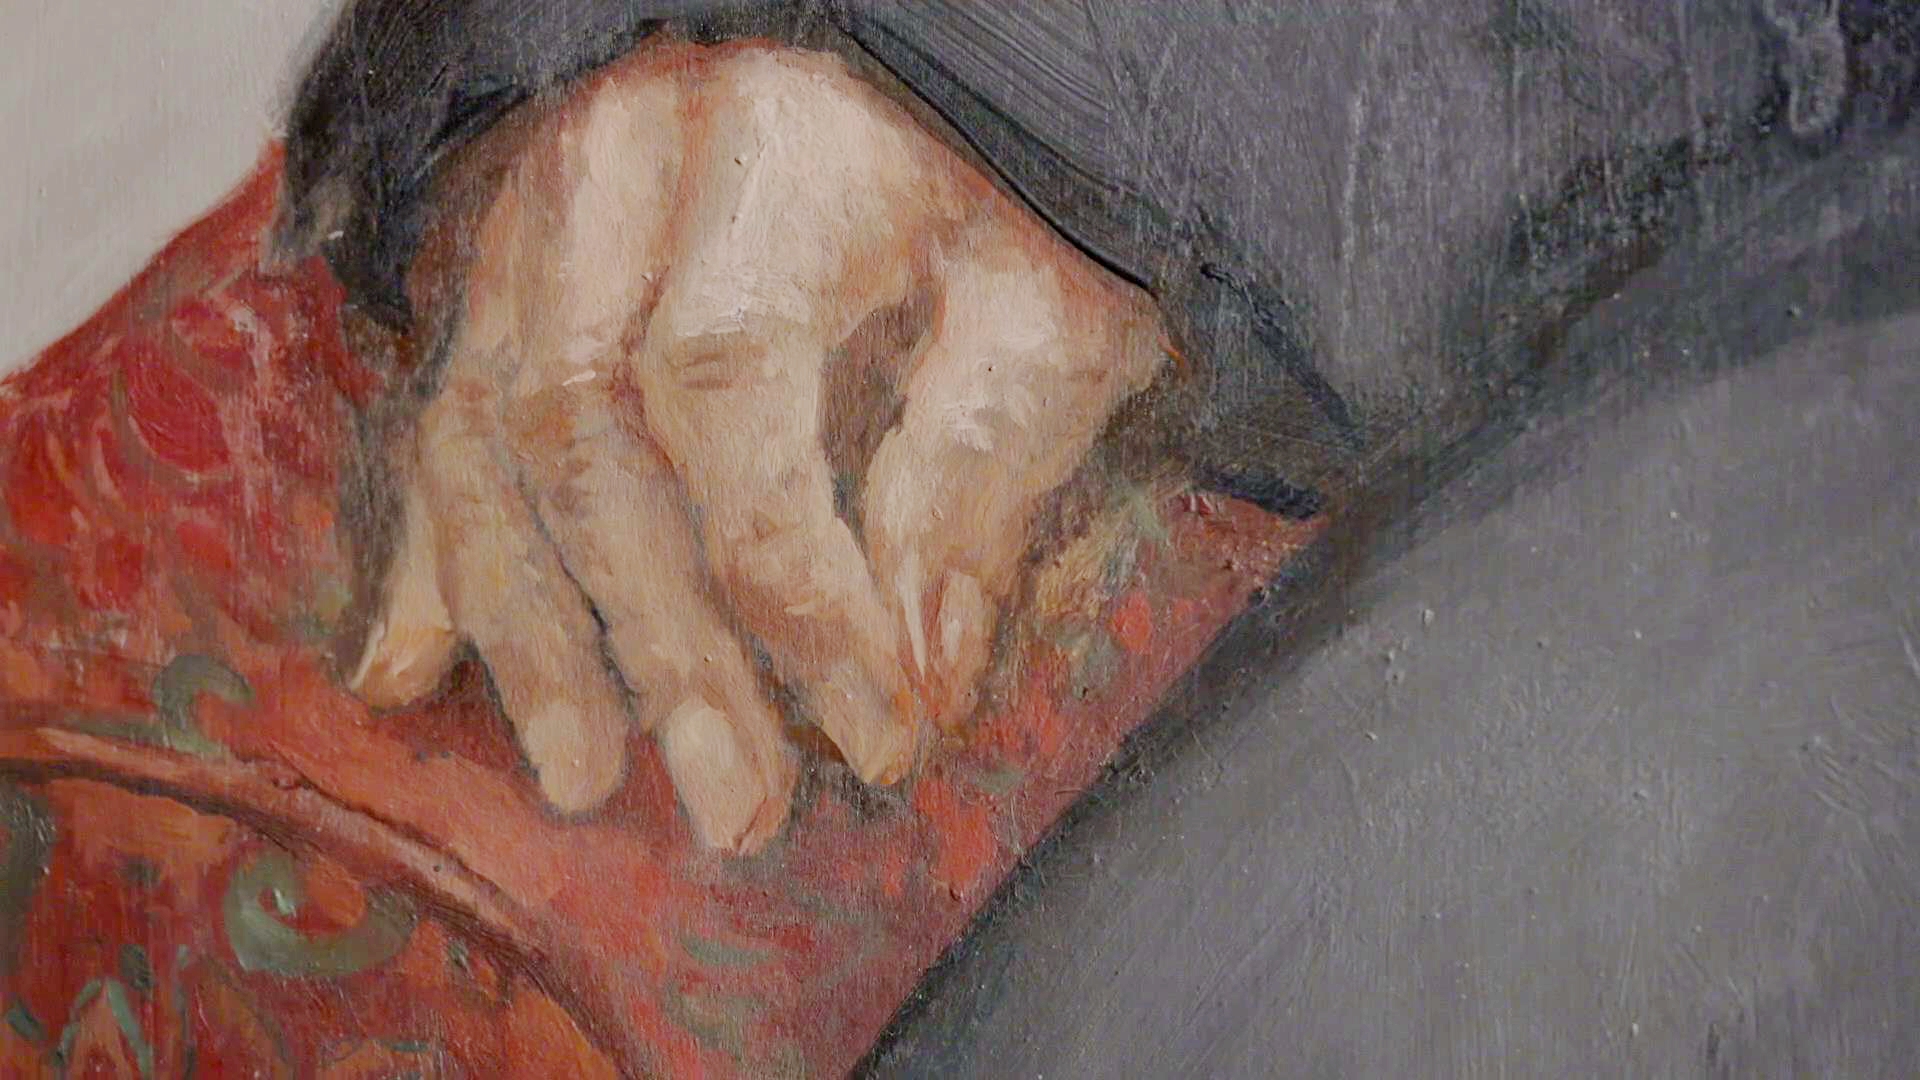 Details of the painting 